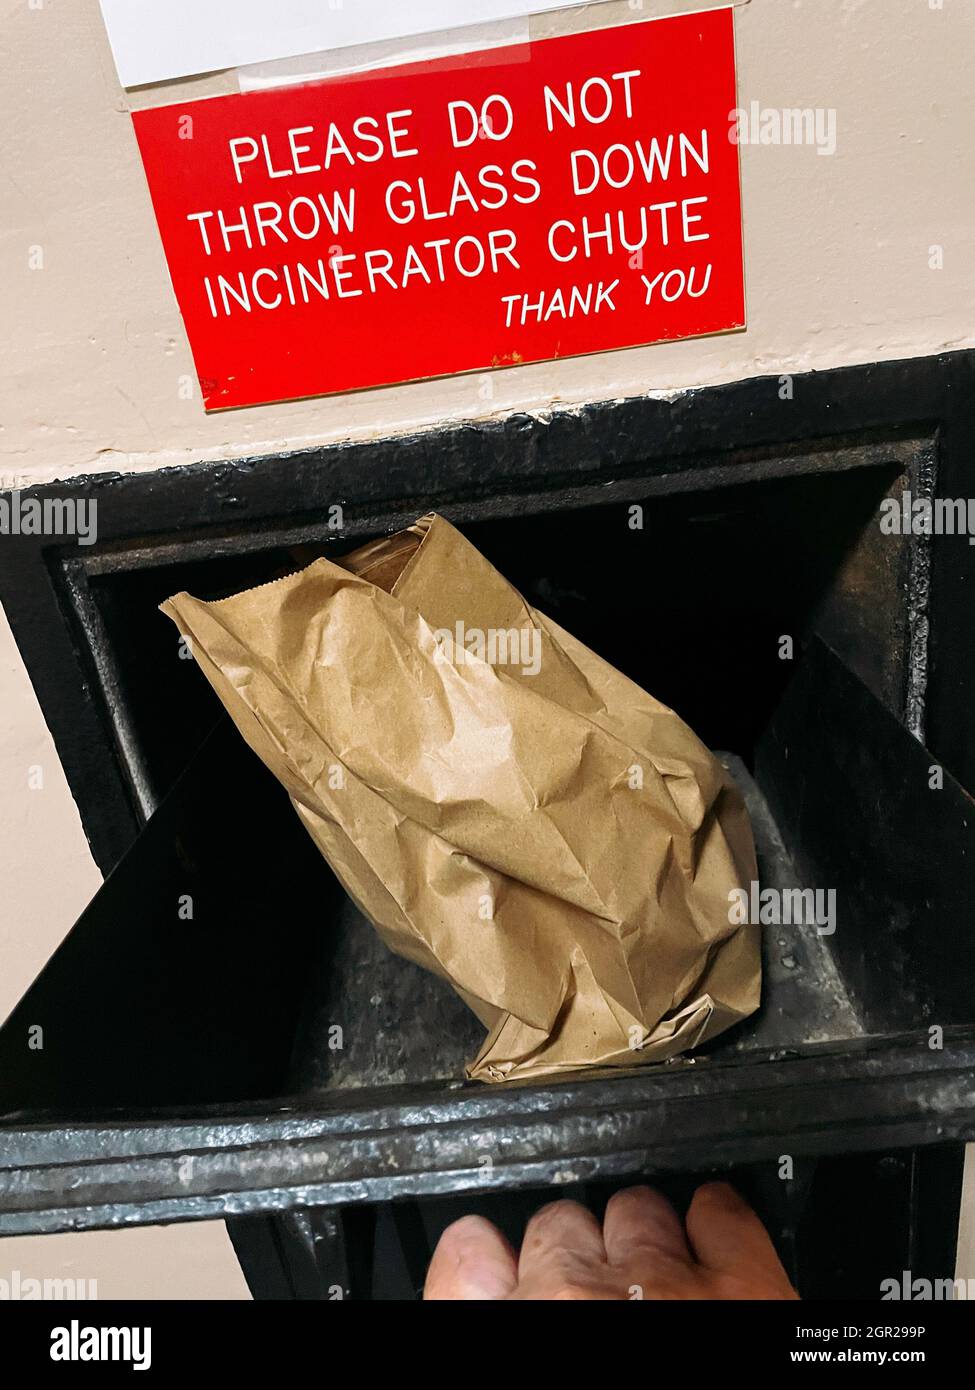 https://c8.alamy.com/comp/2GR299P/bagged-trash-in-an-apartment-building-garbage-chute-opening-2021-nyc-usa-2GR299P.jpg